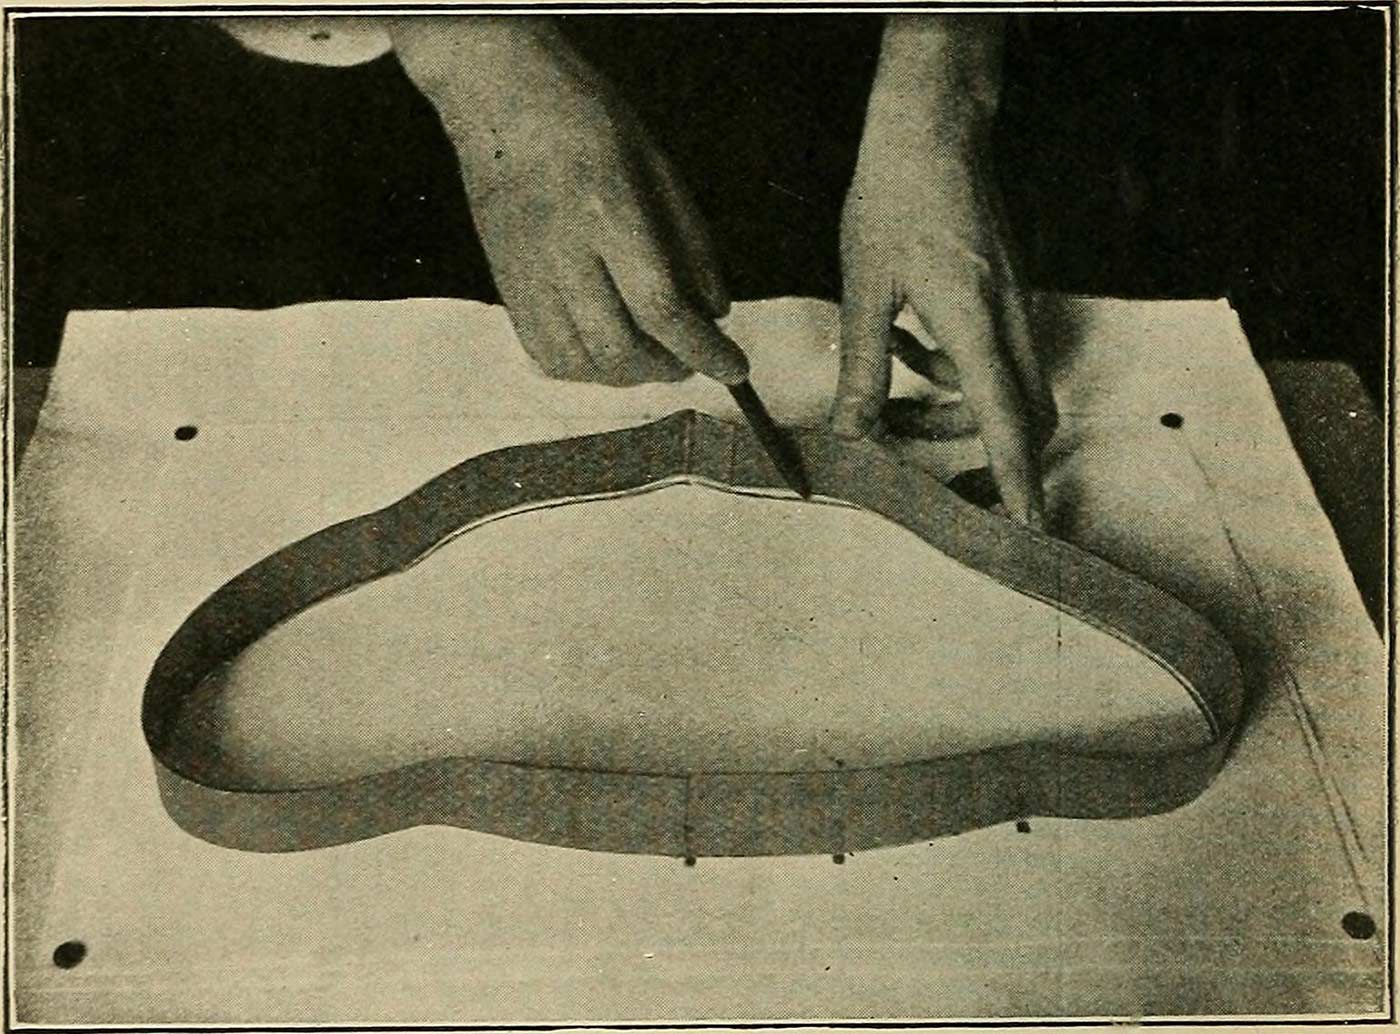 Image from page 61 of "X-ray observations for foreign bodies and their localisation" (1920).